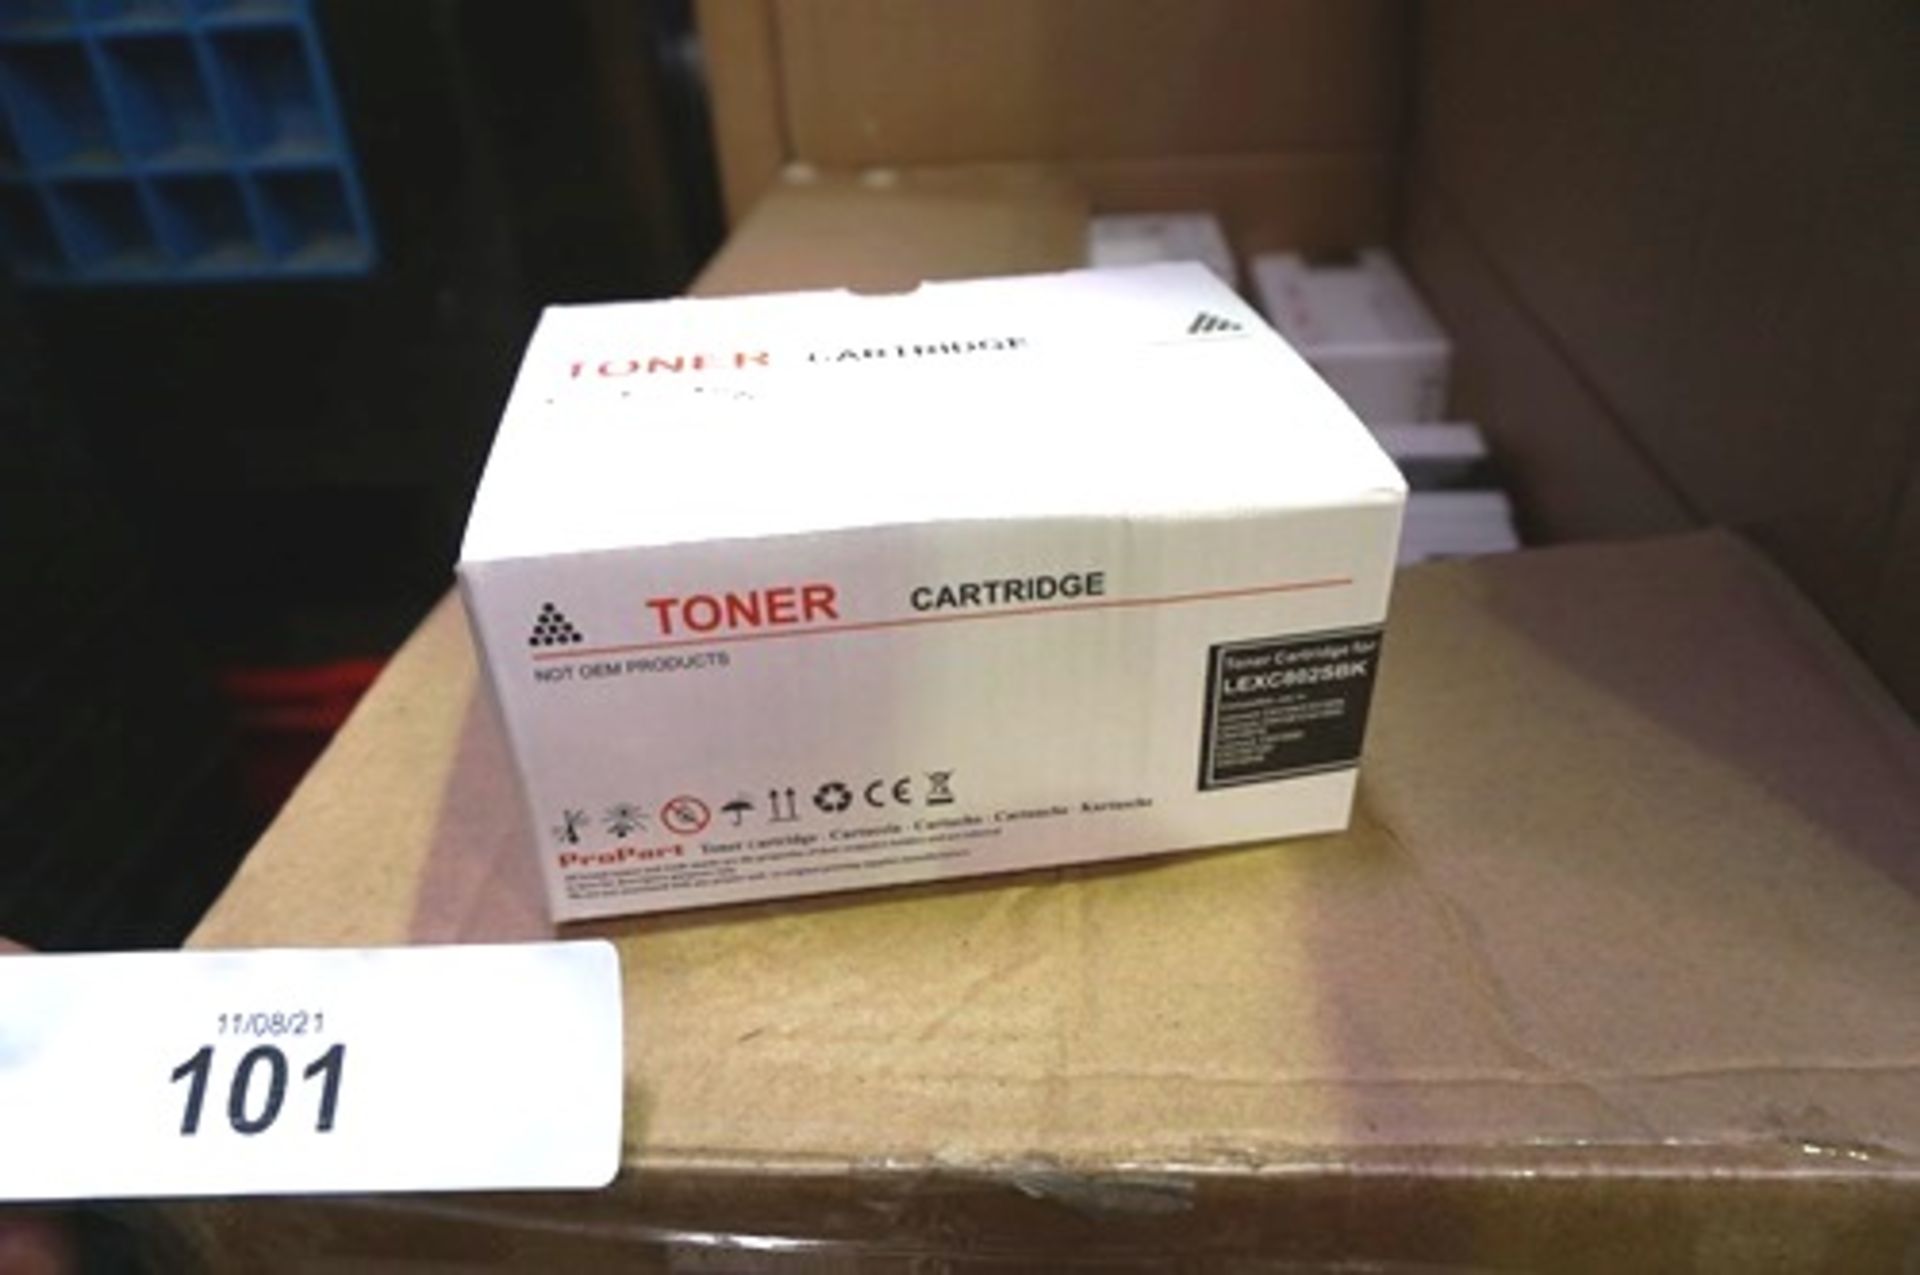 2 x boxes of 15 ProPart toner cartridges, codes KYOTK1150 and KYOTK1160, together with 2 x boxes - Image 4 of 4